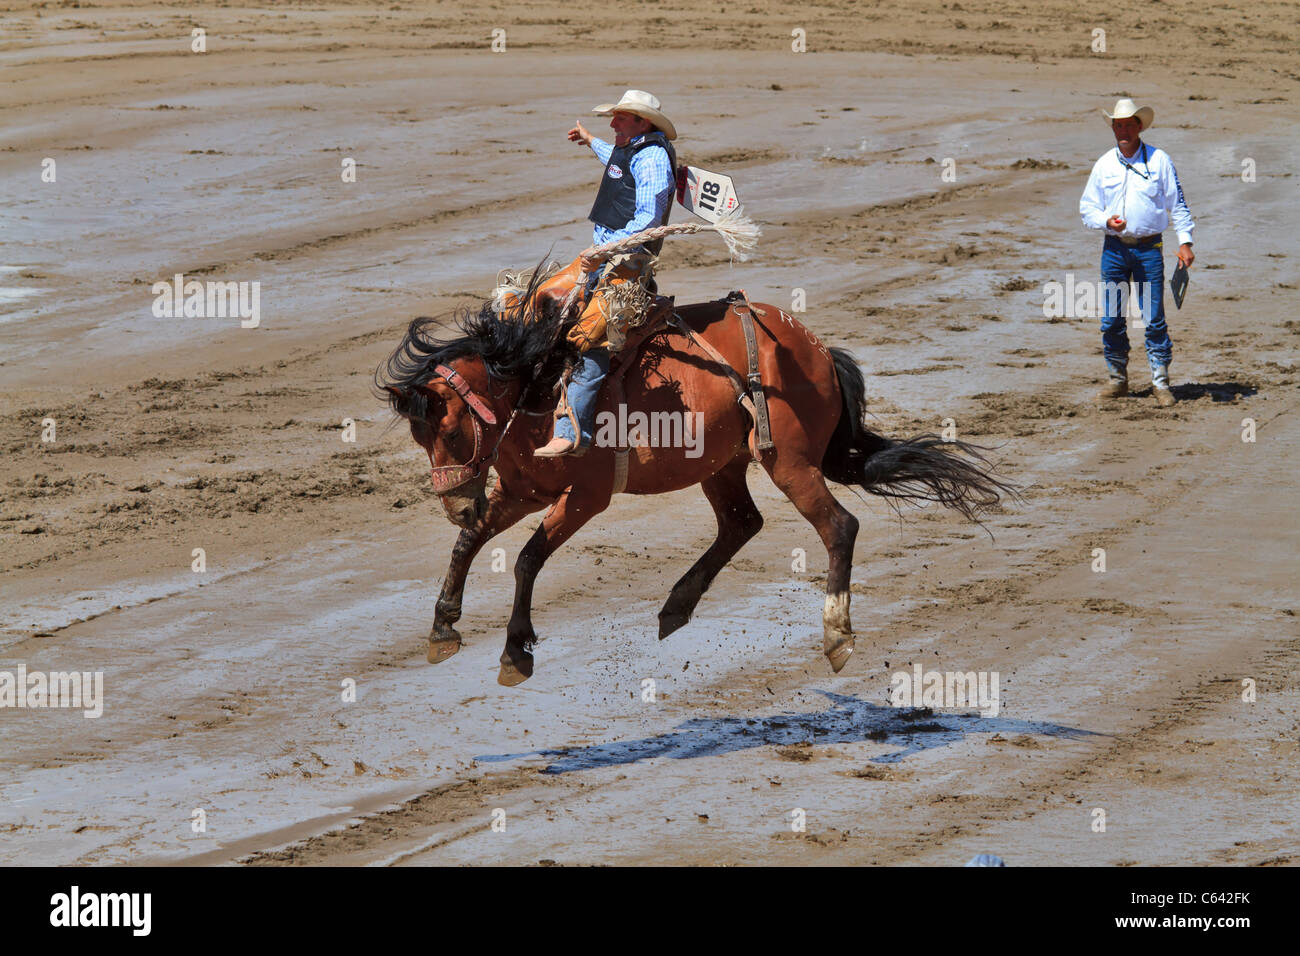 Saddle bronc riding event at the Calgary Stampede, Canada. Stock Photo